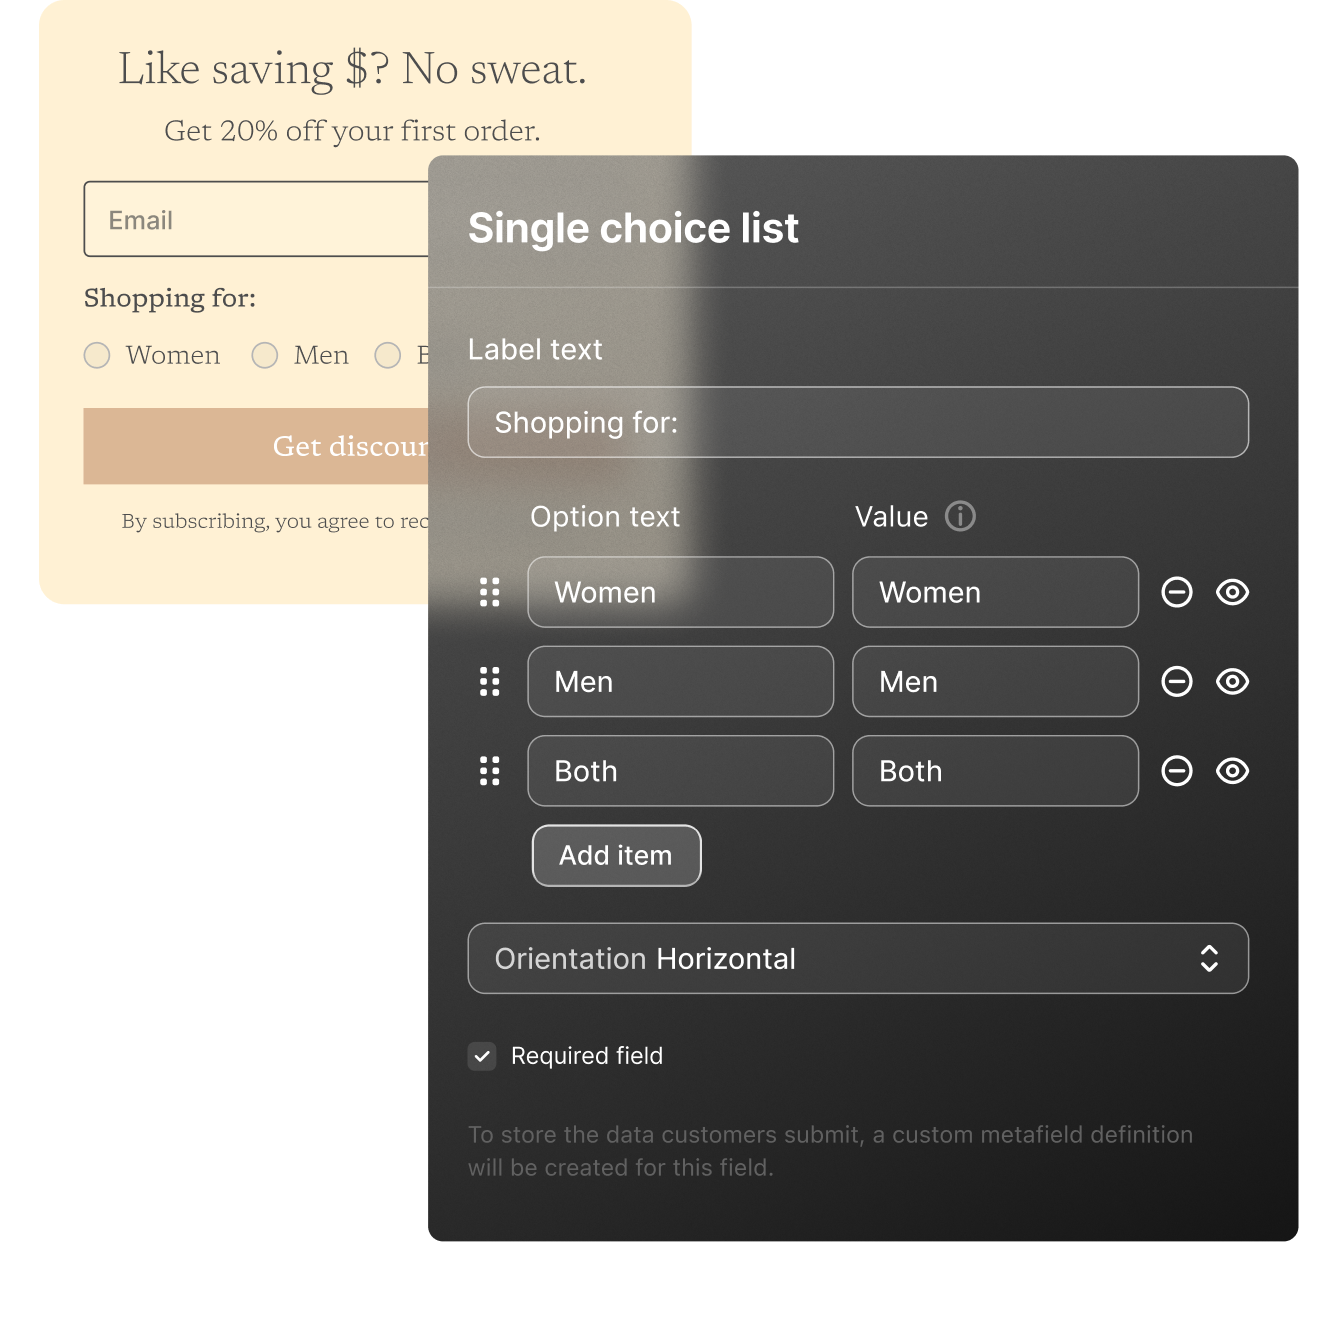 A merchant includes a single-choice list in their popover. The popover poses the question 'Shopping for:' and offers three options: women, men, or both.